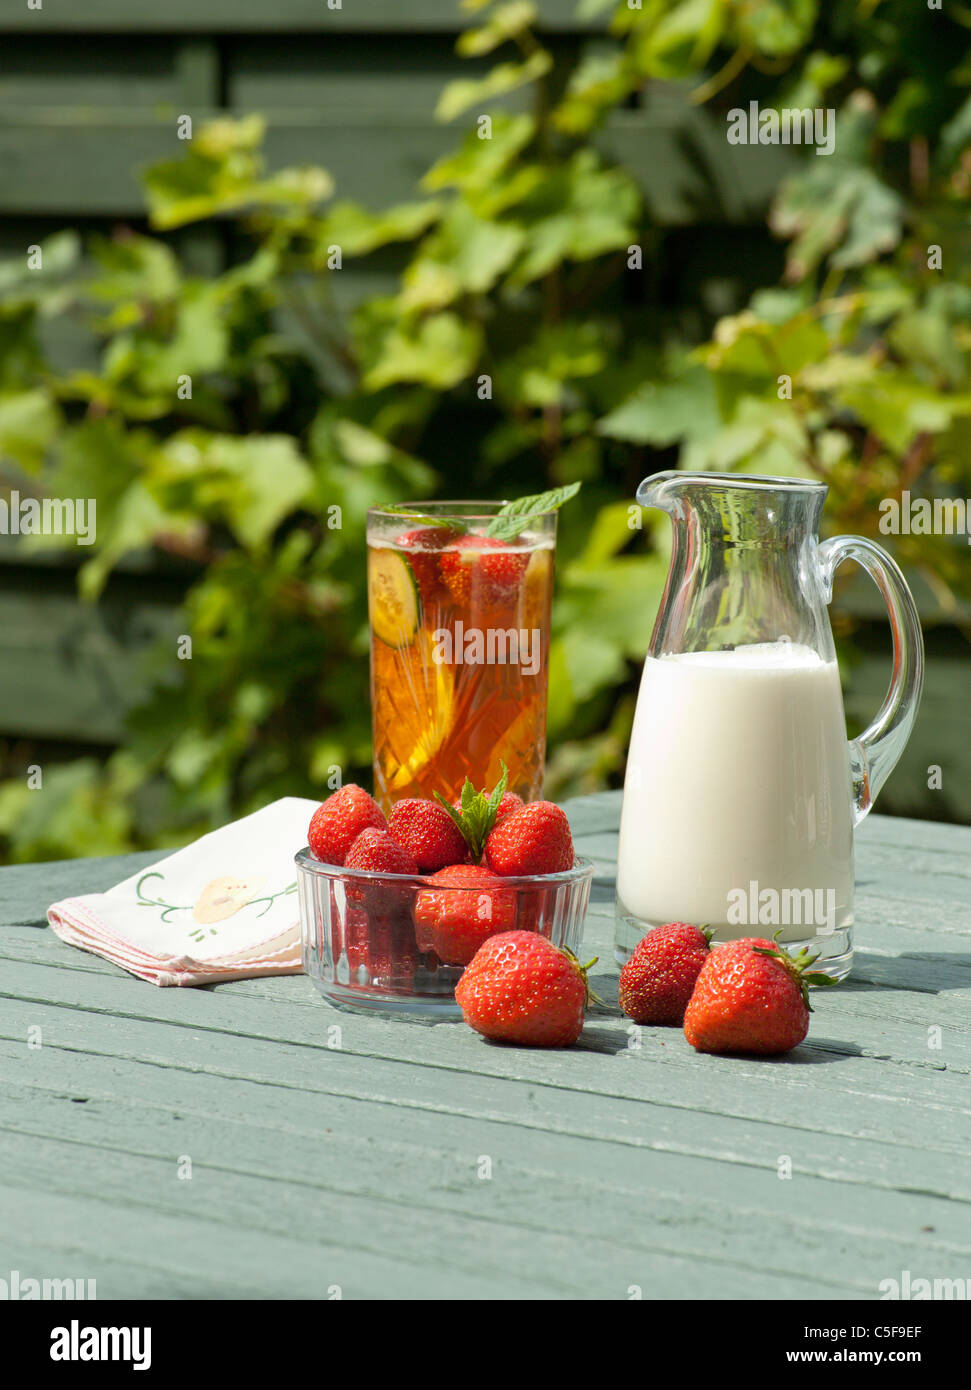 PIMMS AND STRAWBERRIES AND CREAM IN SUMMER GARDEN UK Stock Photo